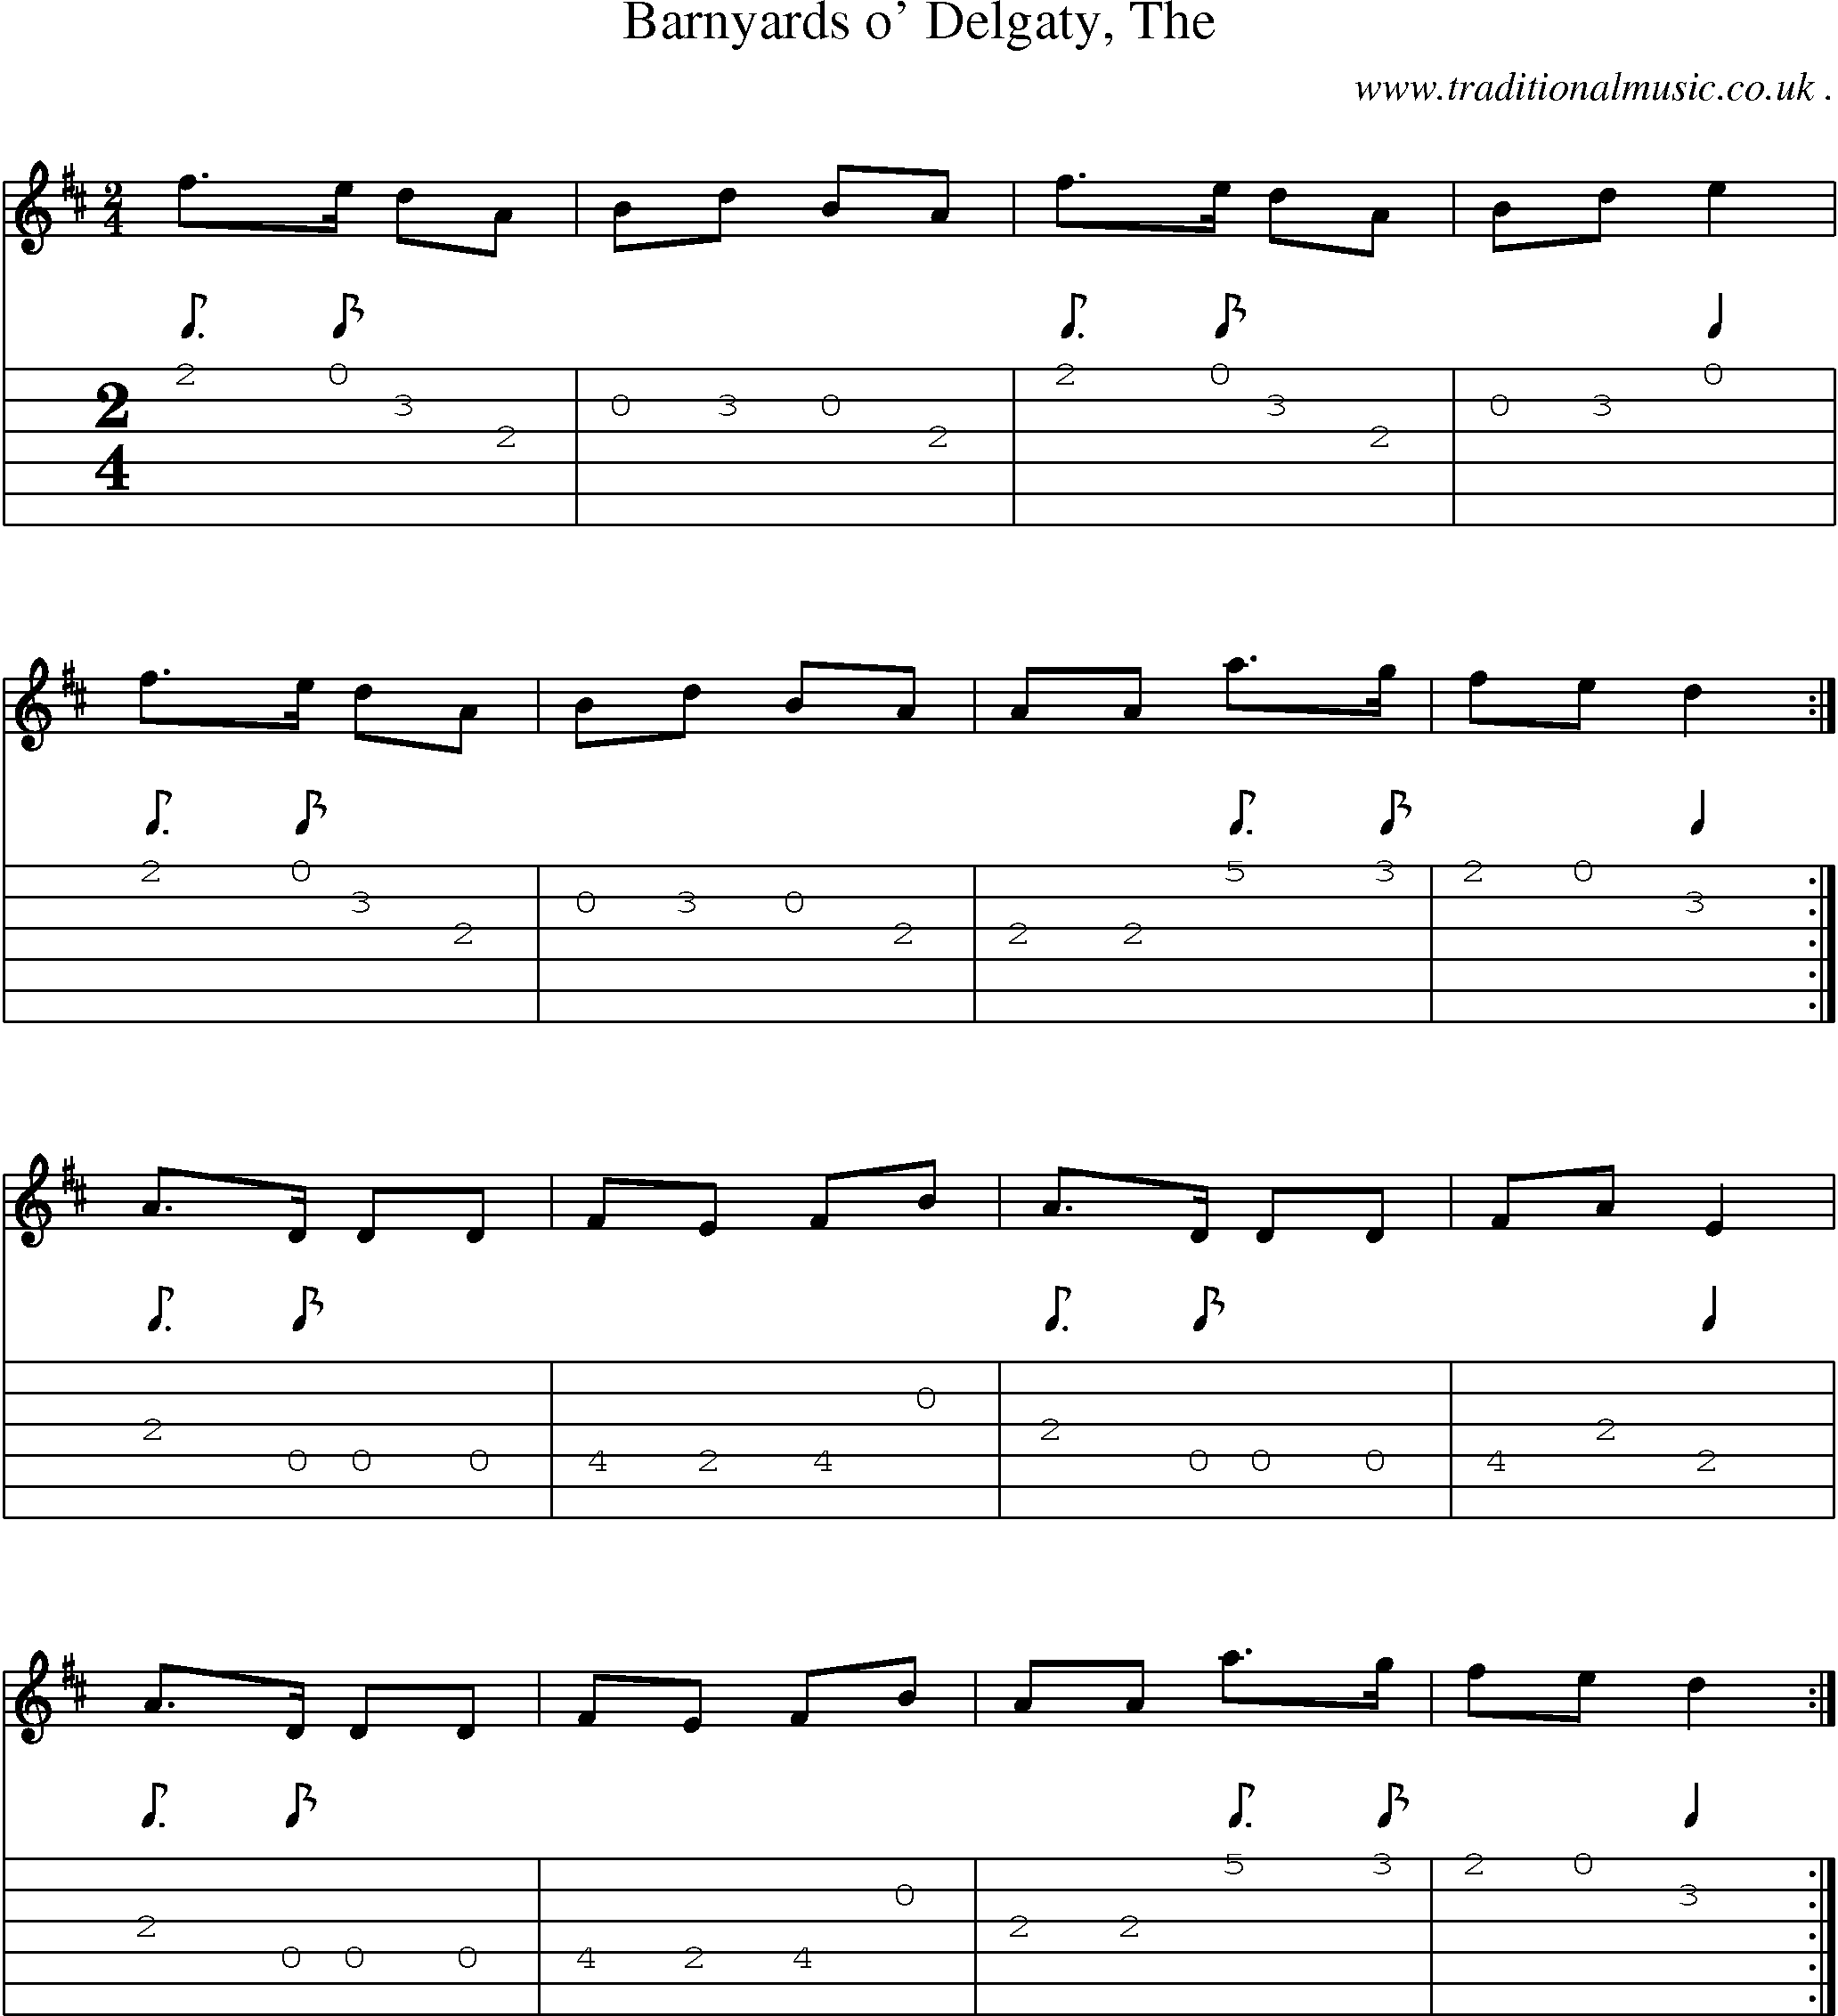 Sheet-music  score, Chords and Guitar Tabs for Barnyards O Delgaty The